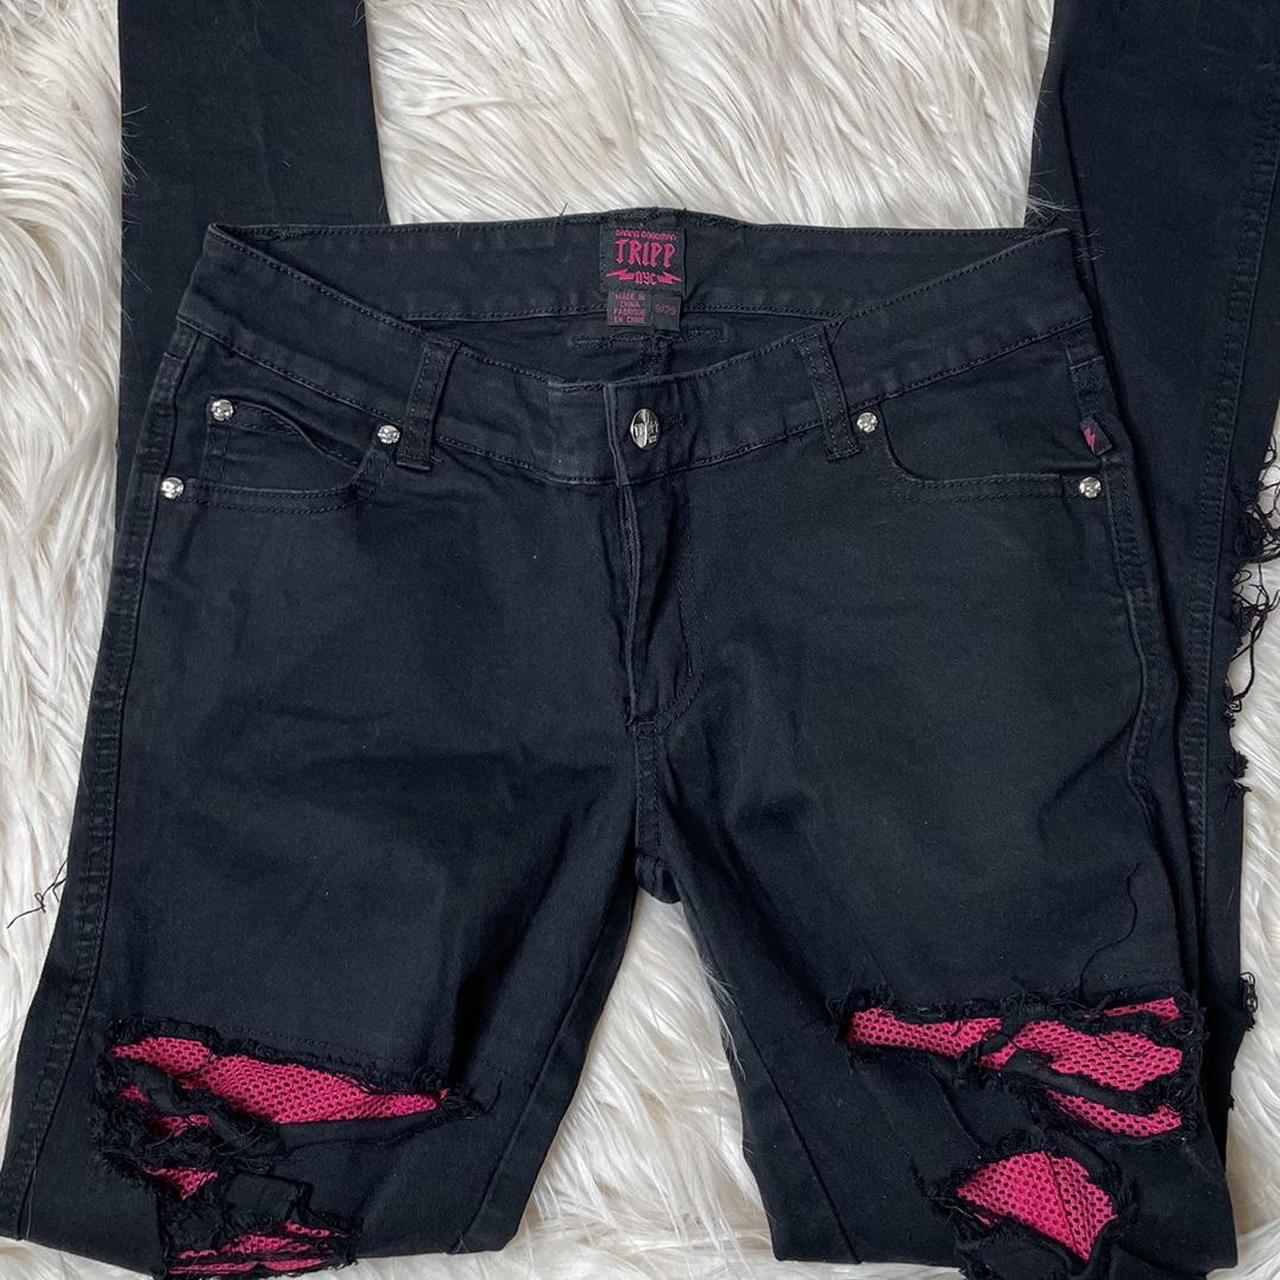 Tripp nyc jeans skinny with pink marked size 9 - Depop